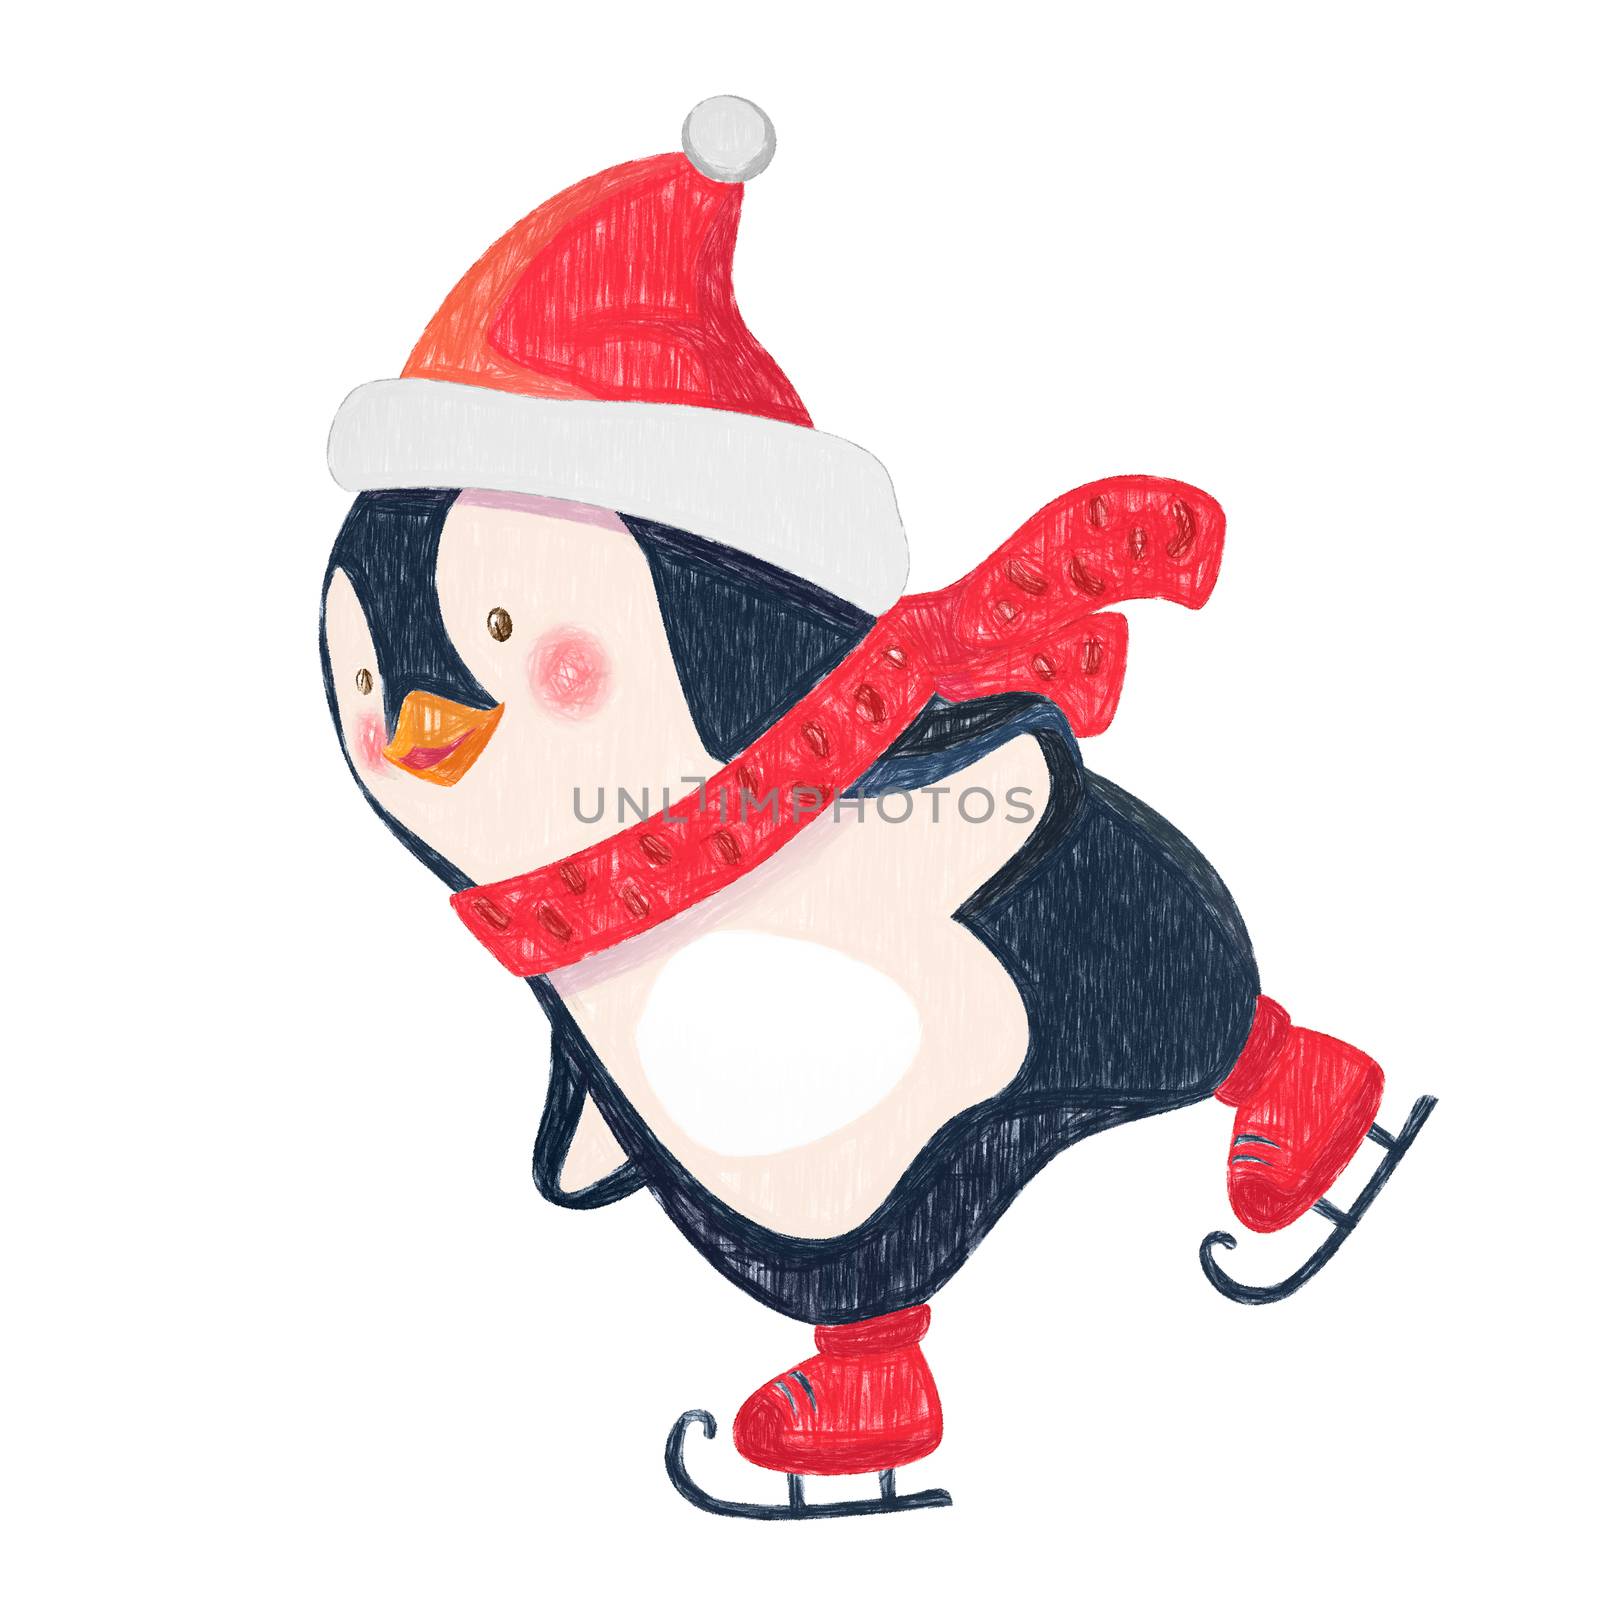 penguin skater cartoon by Visual-Content